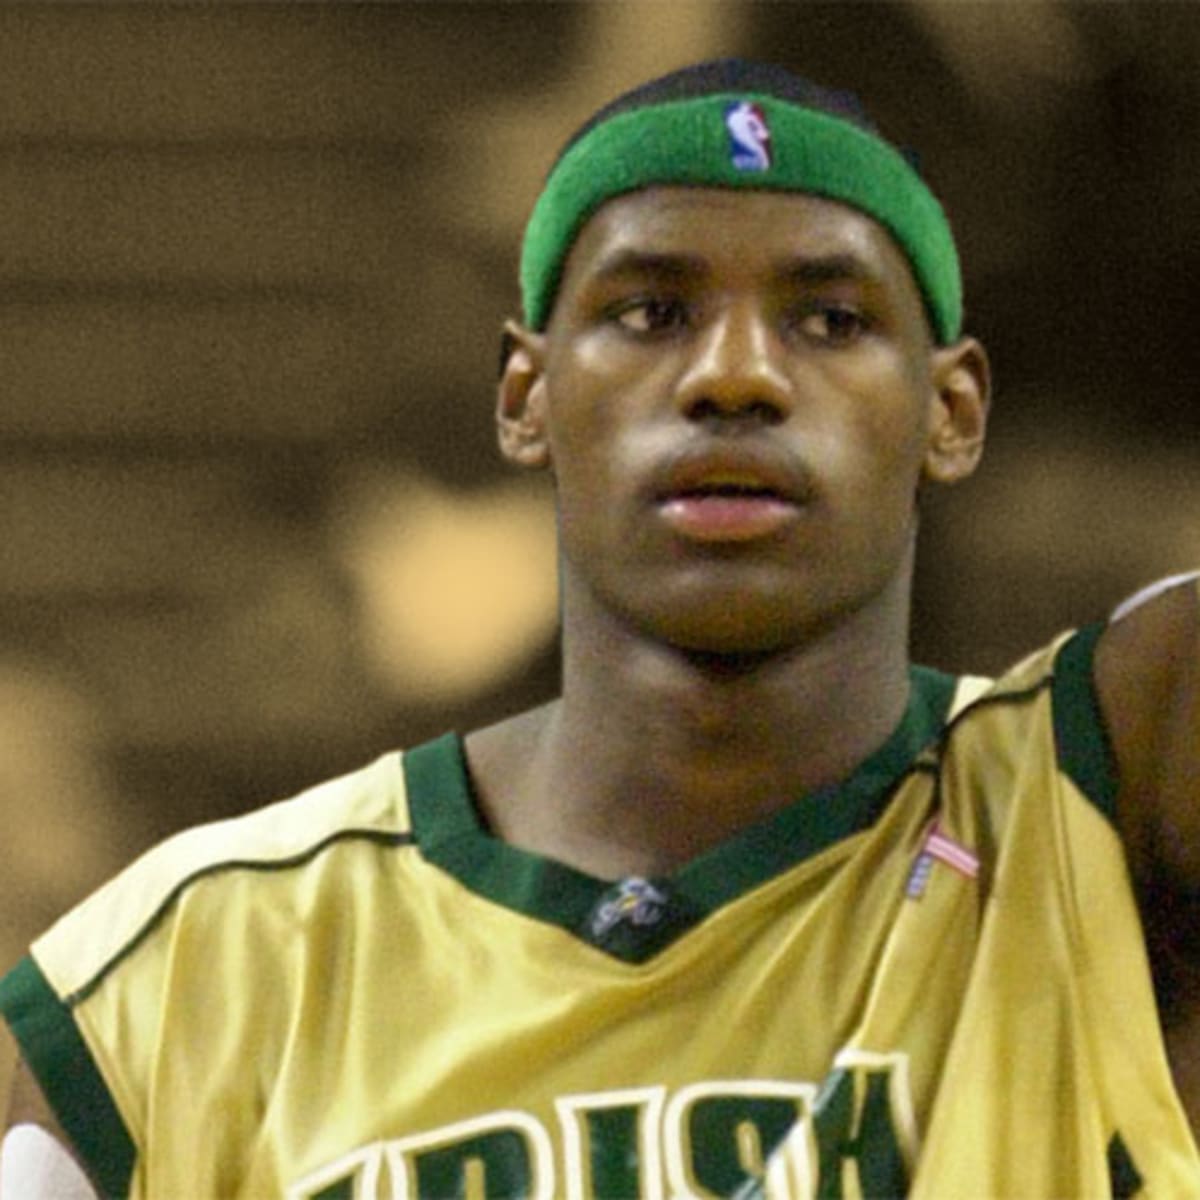 The Chosen One St. Vincent-st. Mary High LeBron James Sports